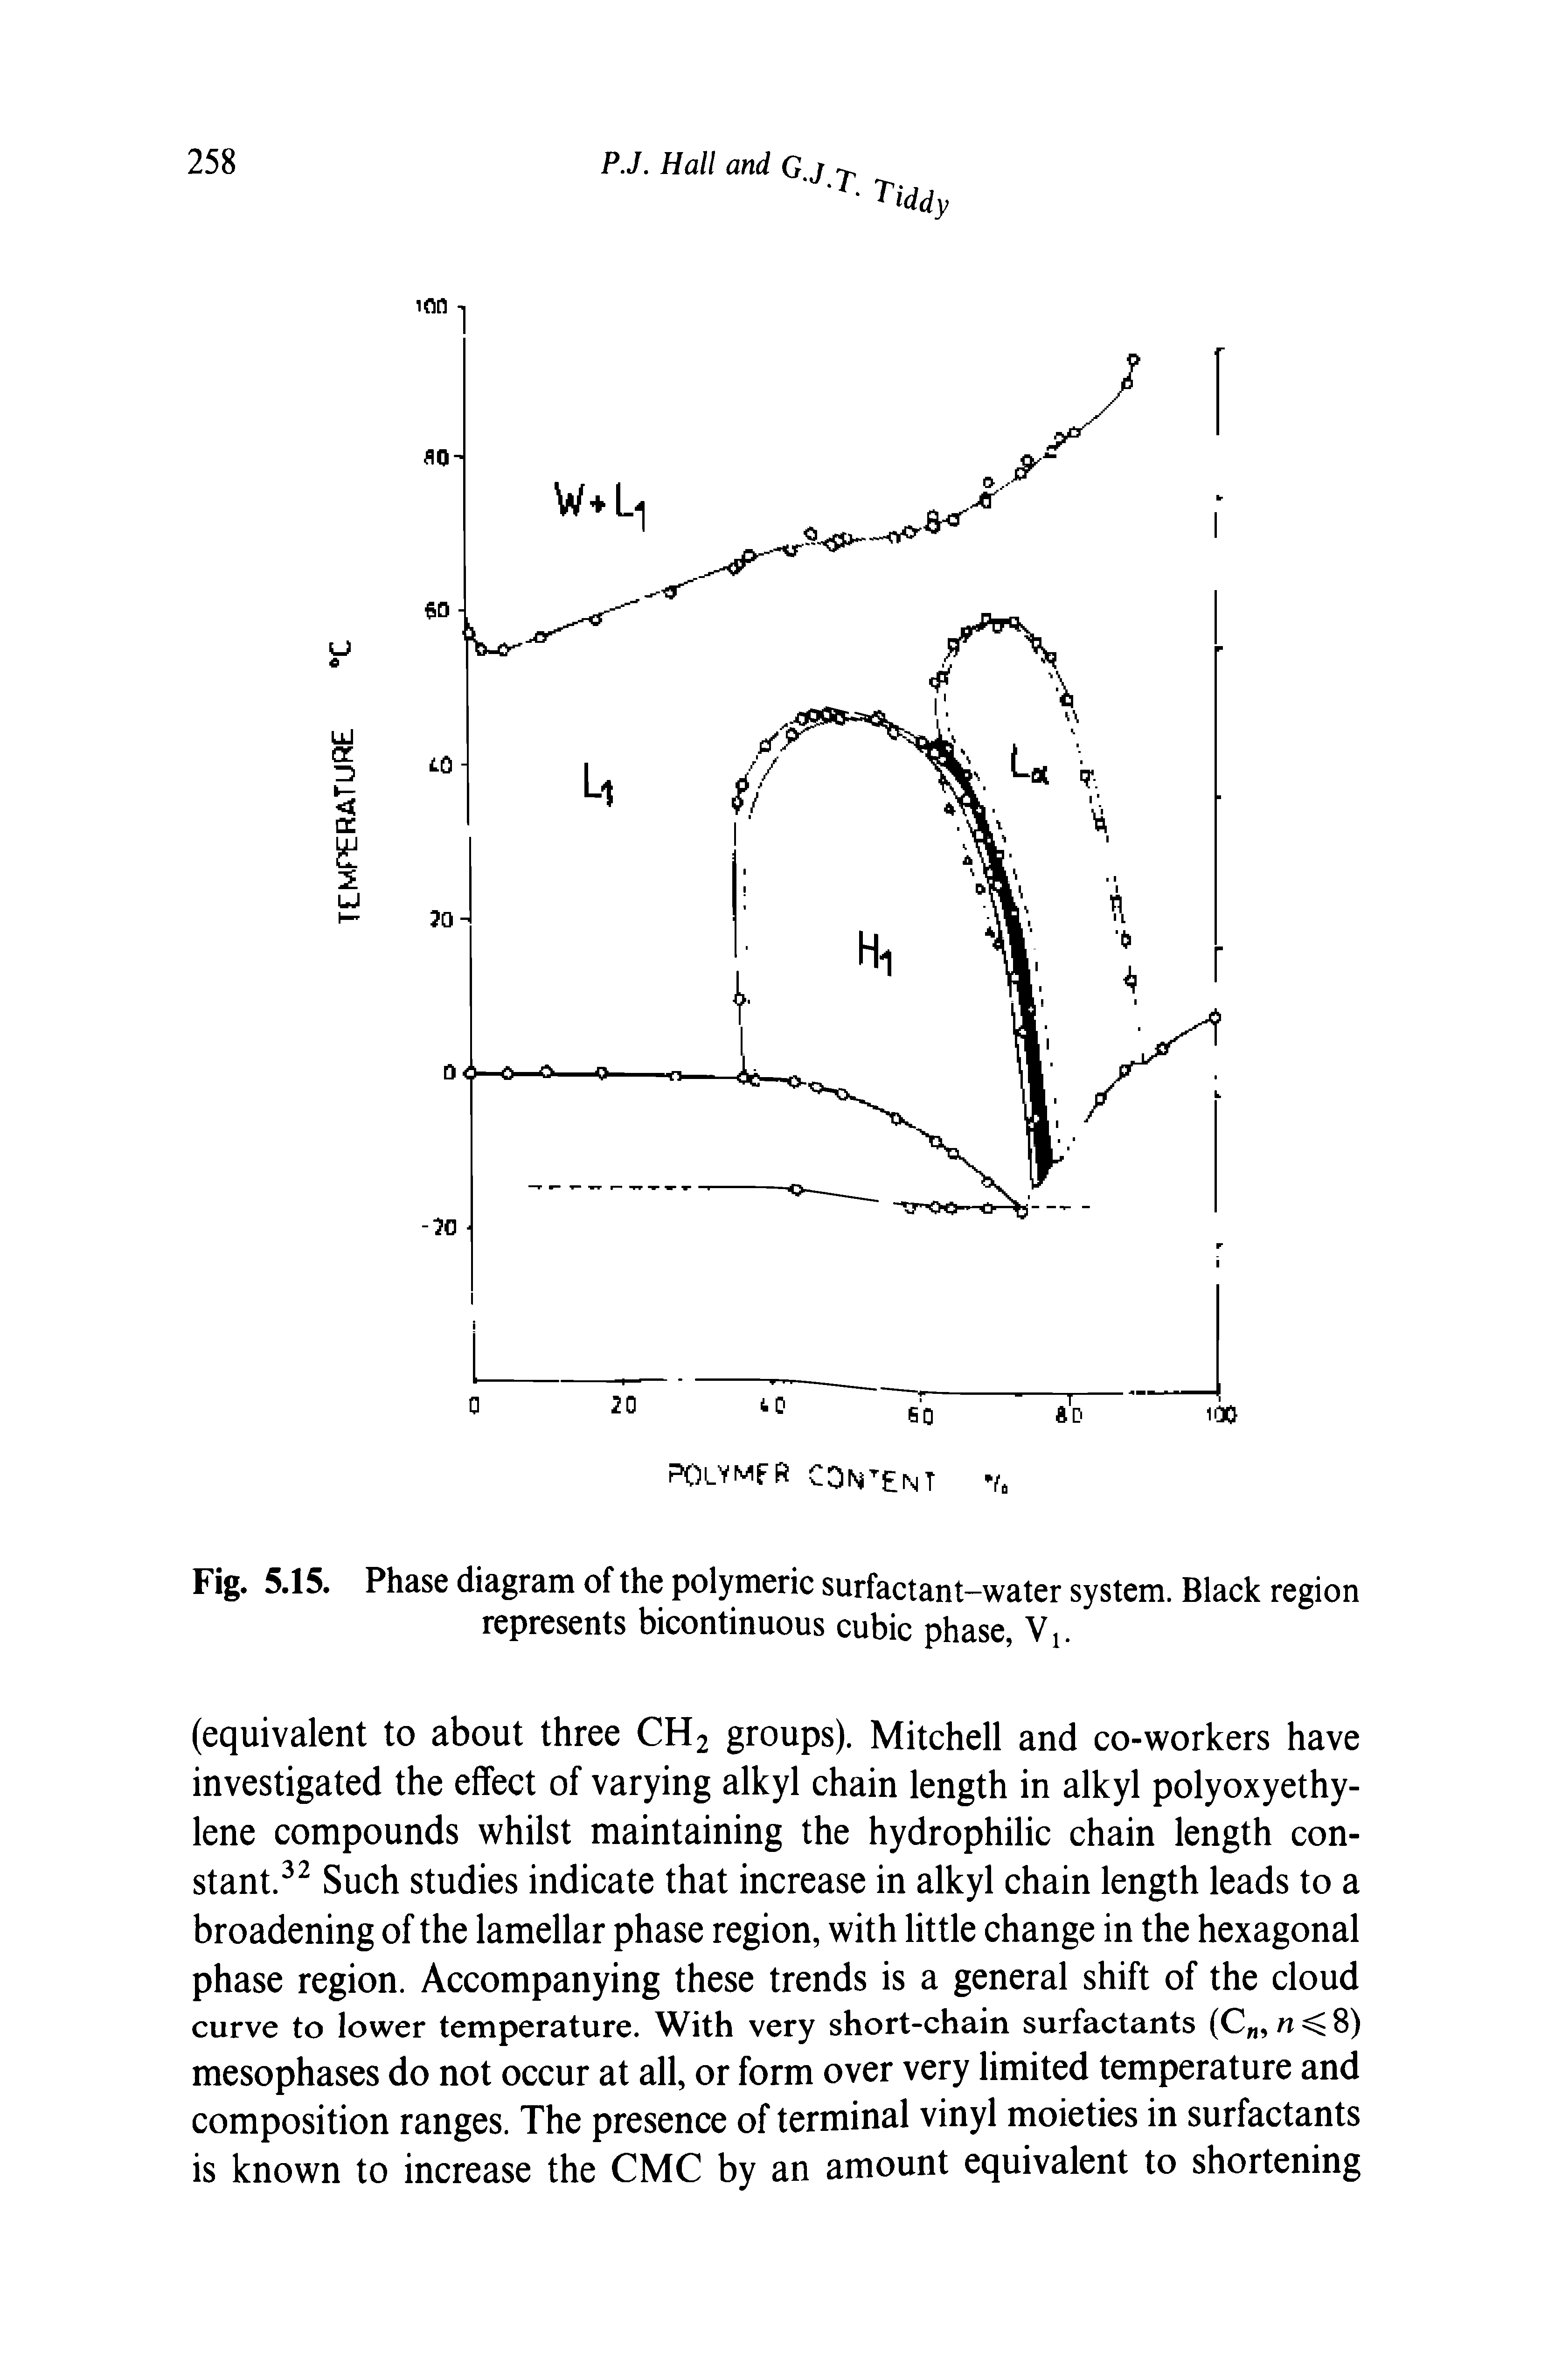 Fig. 5.15. Phase diagram of the polymeric surfactant-water system. Black region represents bicontinuous cubic phase, Vj.